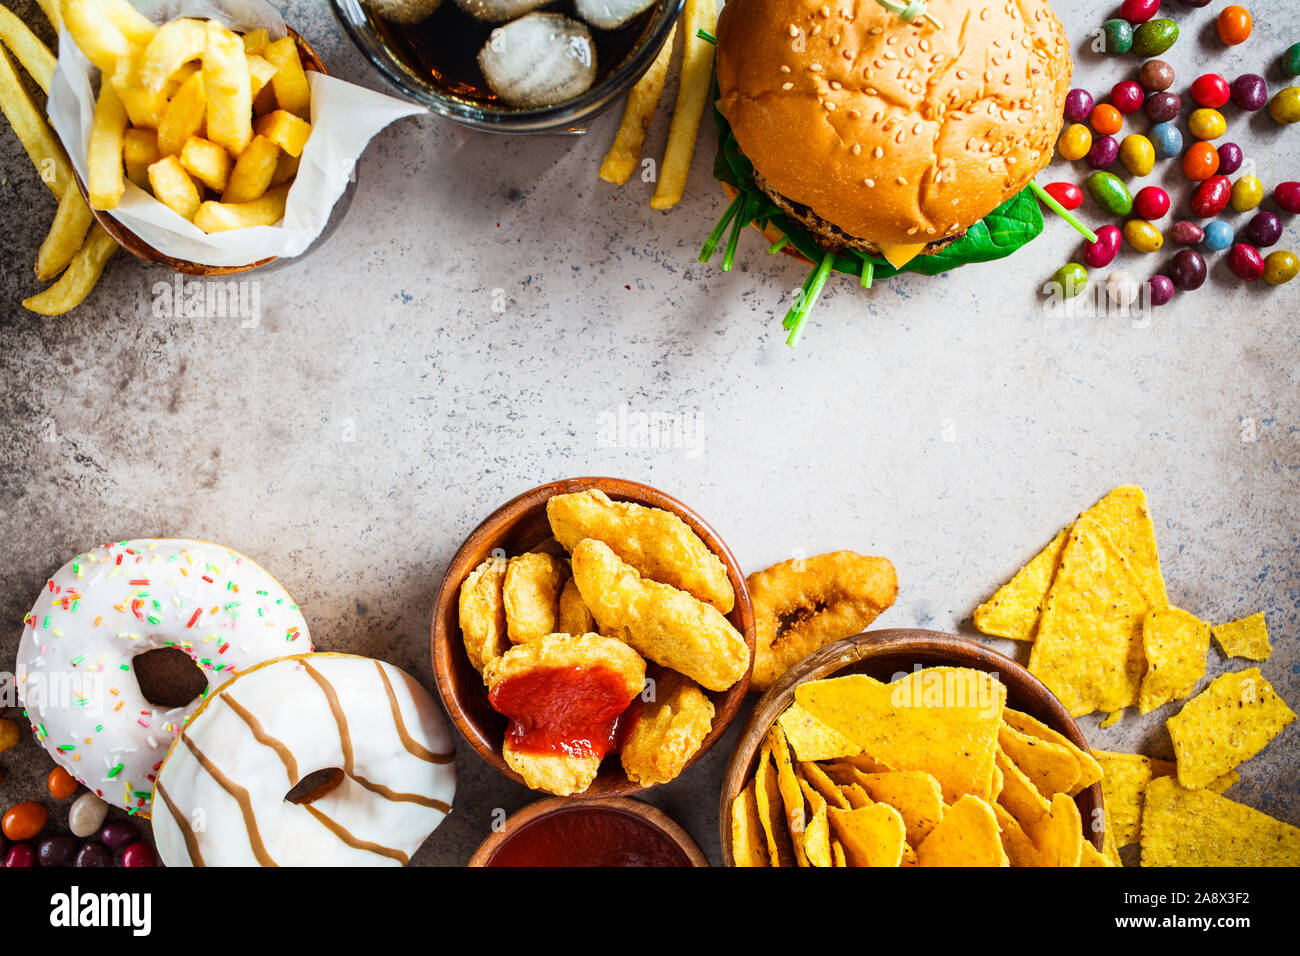 Assortment of fast food. Junk food background. Cheeseburgers, french fries, nachos, donuts, soda and nuggets on a gray background. Stock Photo